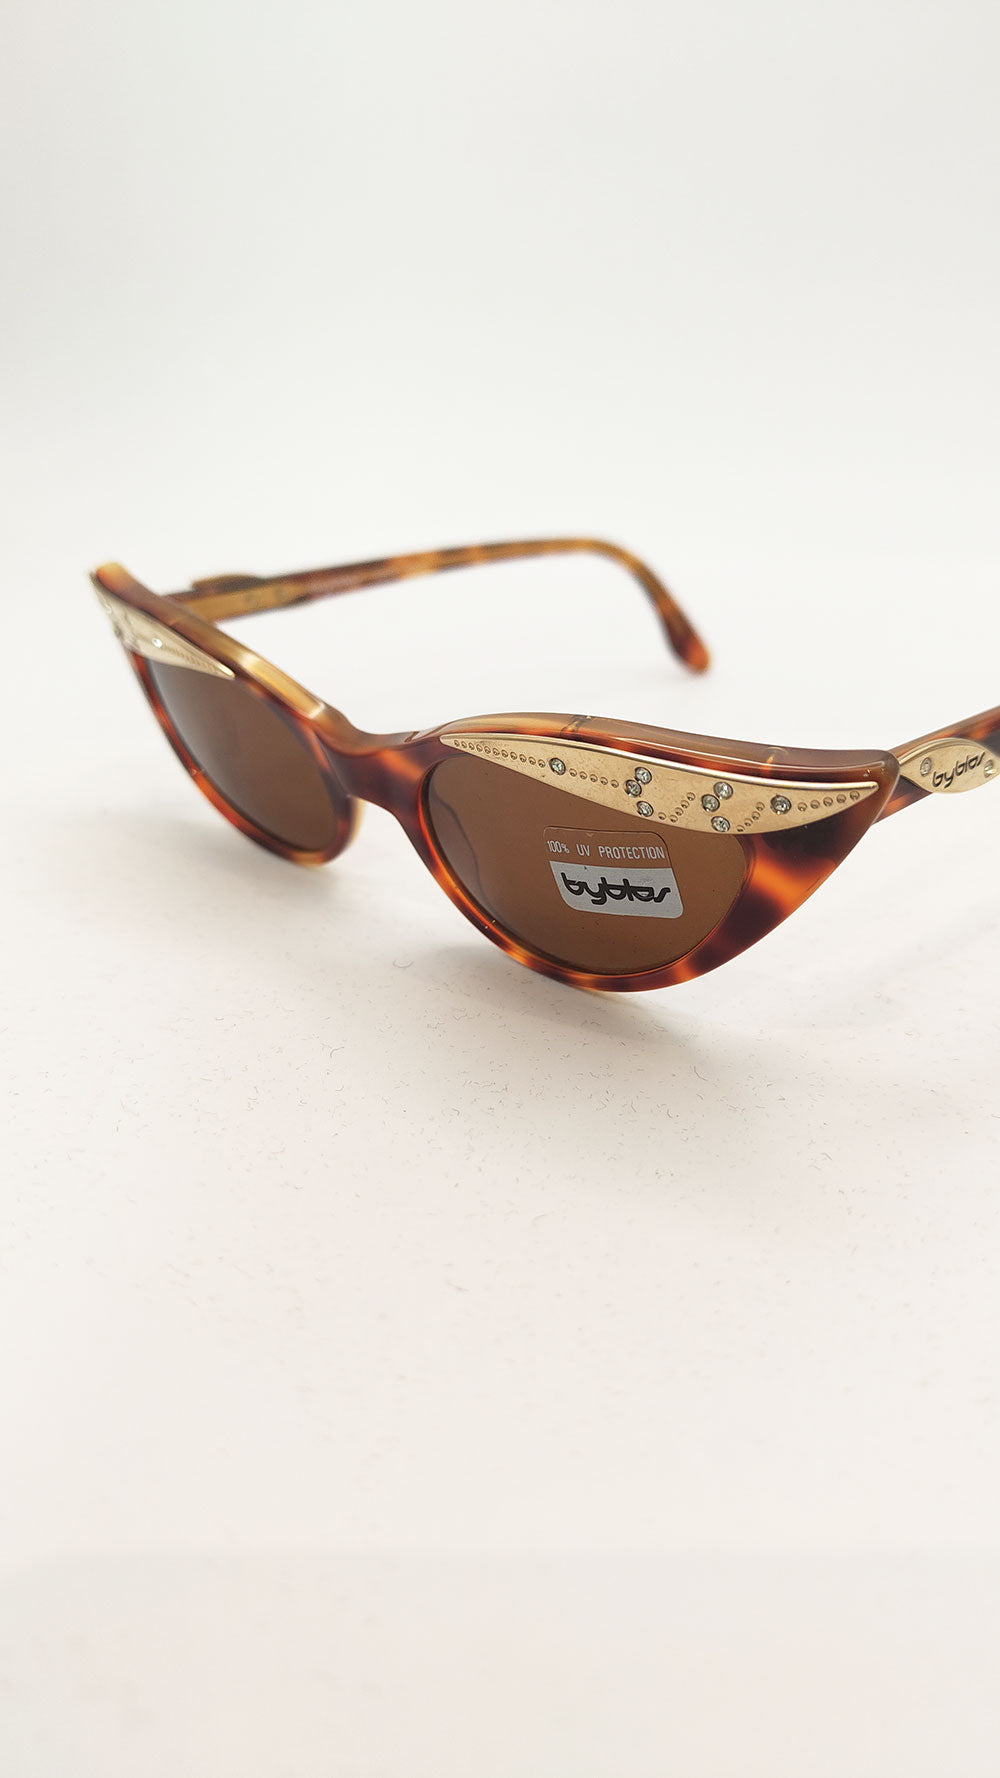 A vintage pair of womens sunglasses by luxury fashion house, Byblos. Made from a tortoiseshell patterned plastic with gold tone hardware and rhinestone detailing.